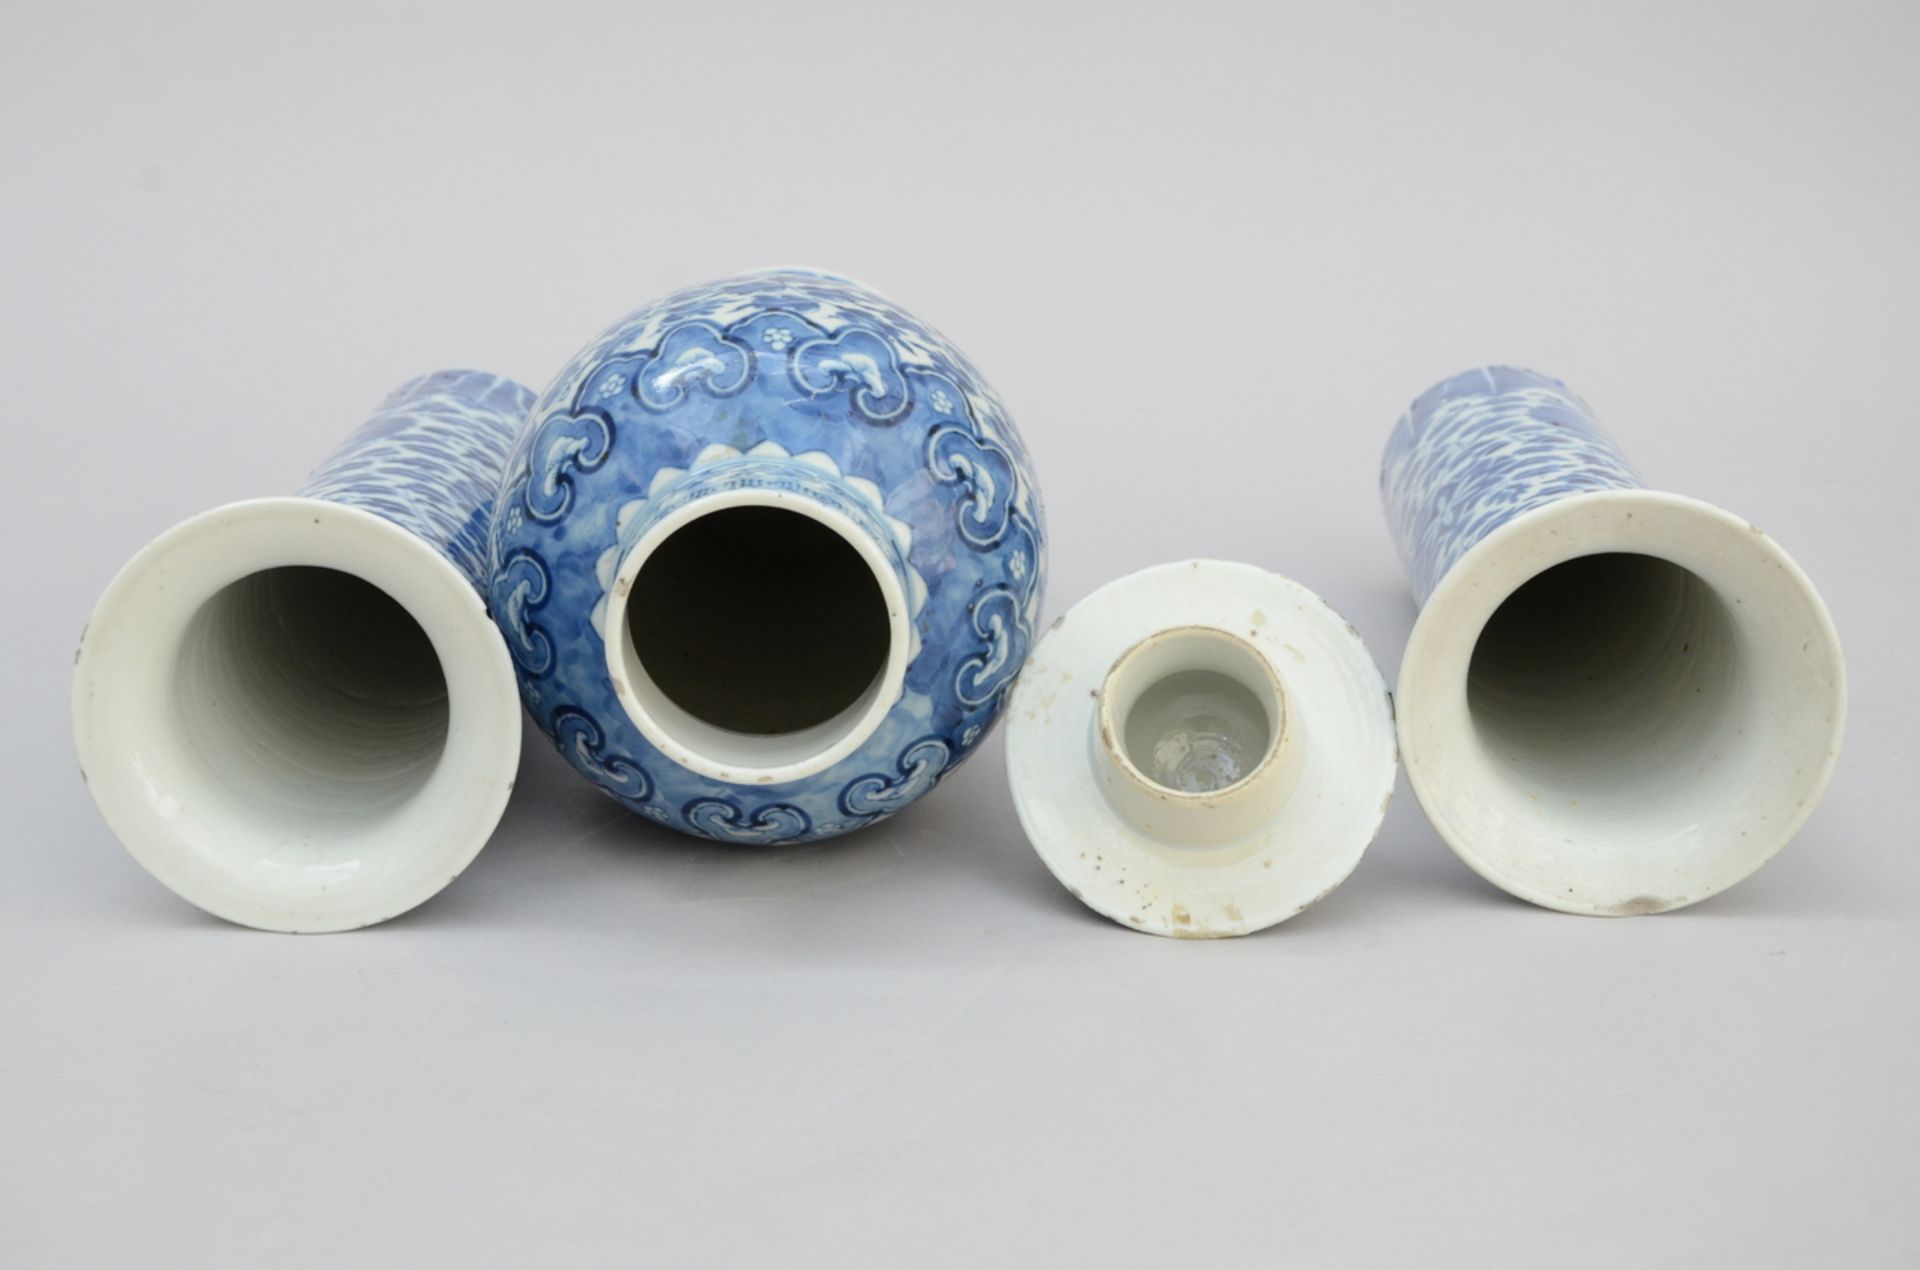 Three vases in Chinese blue and white porcelain, 19th century (h40cm and h30cm) (*) - Image 3 of 5